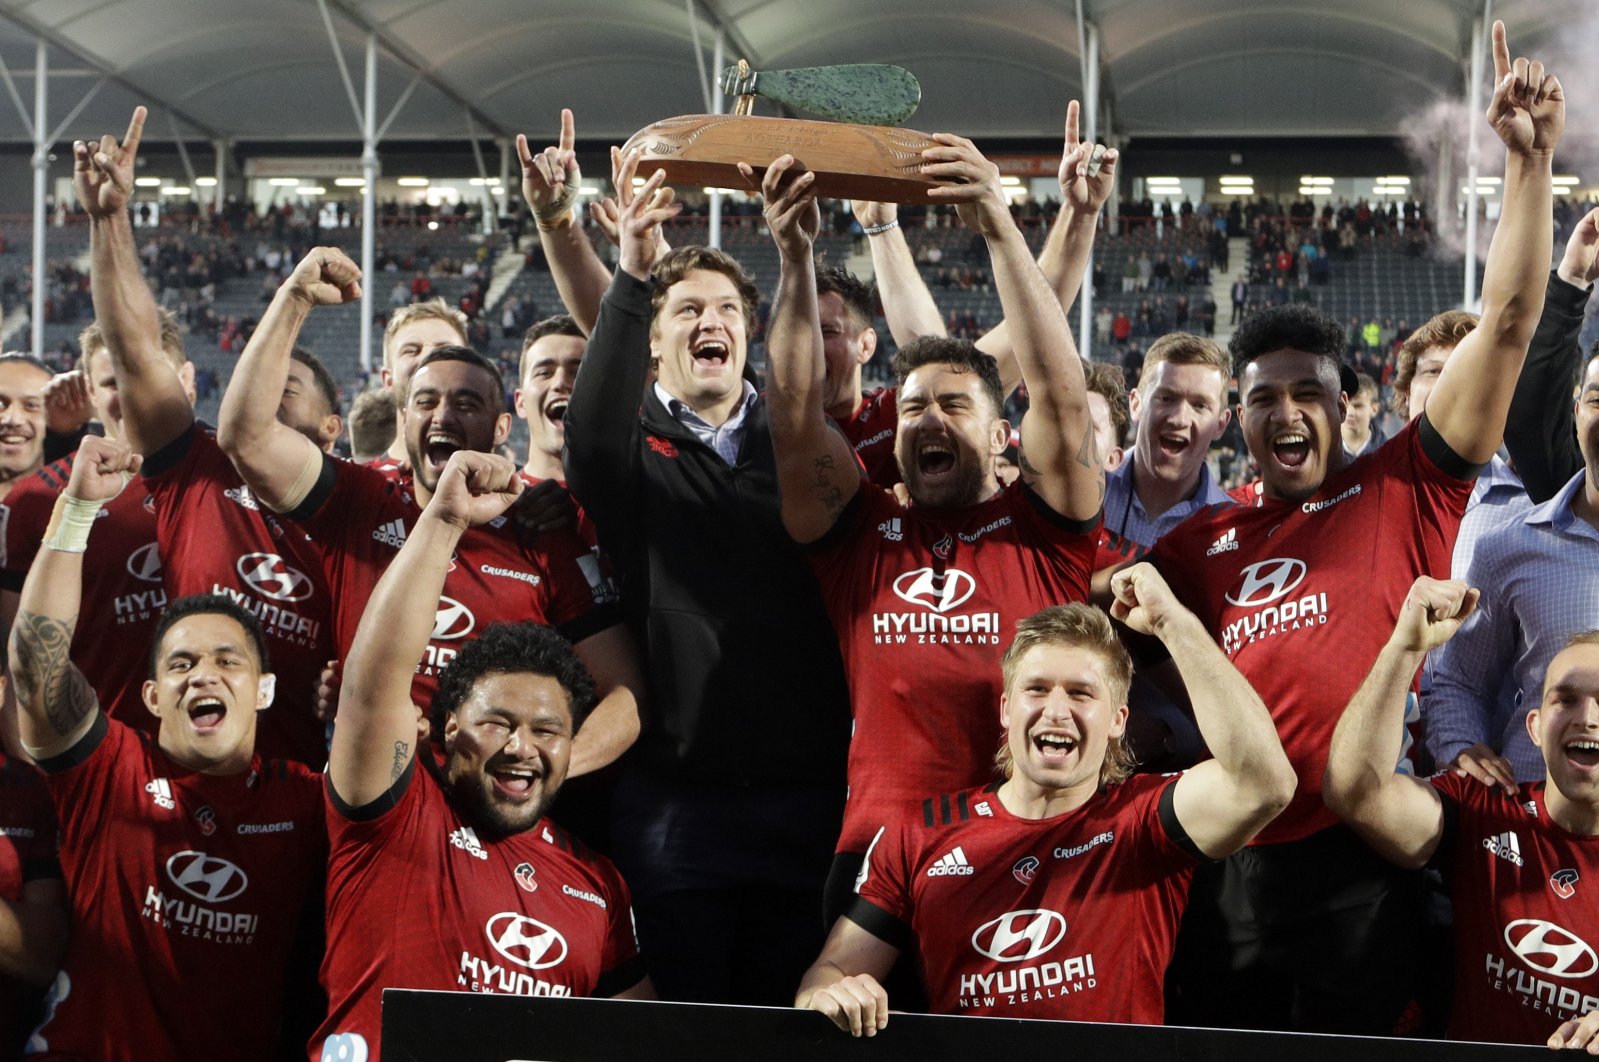 Crusaders Codie Taylor and injured teammate Scott Barrett hold the Super Rugby Aotearoa trophy aloft after defeating the Highlanders in Christchurch, New Zealand, Aug. 9, 2020. (AP Photo)